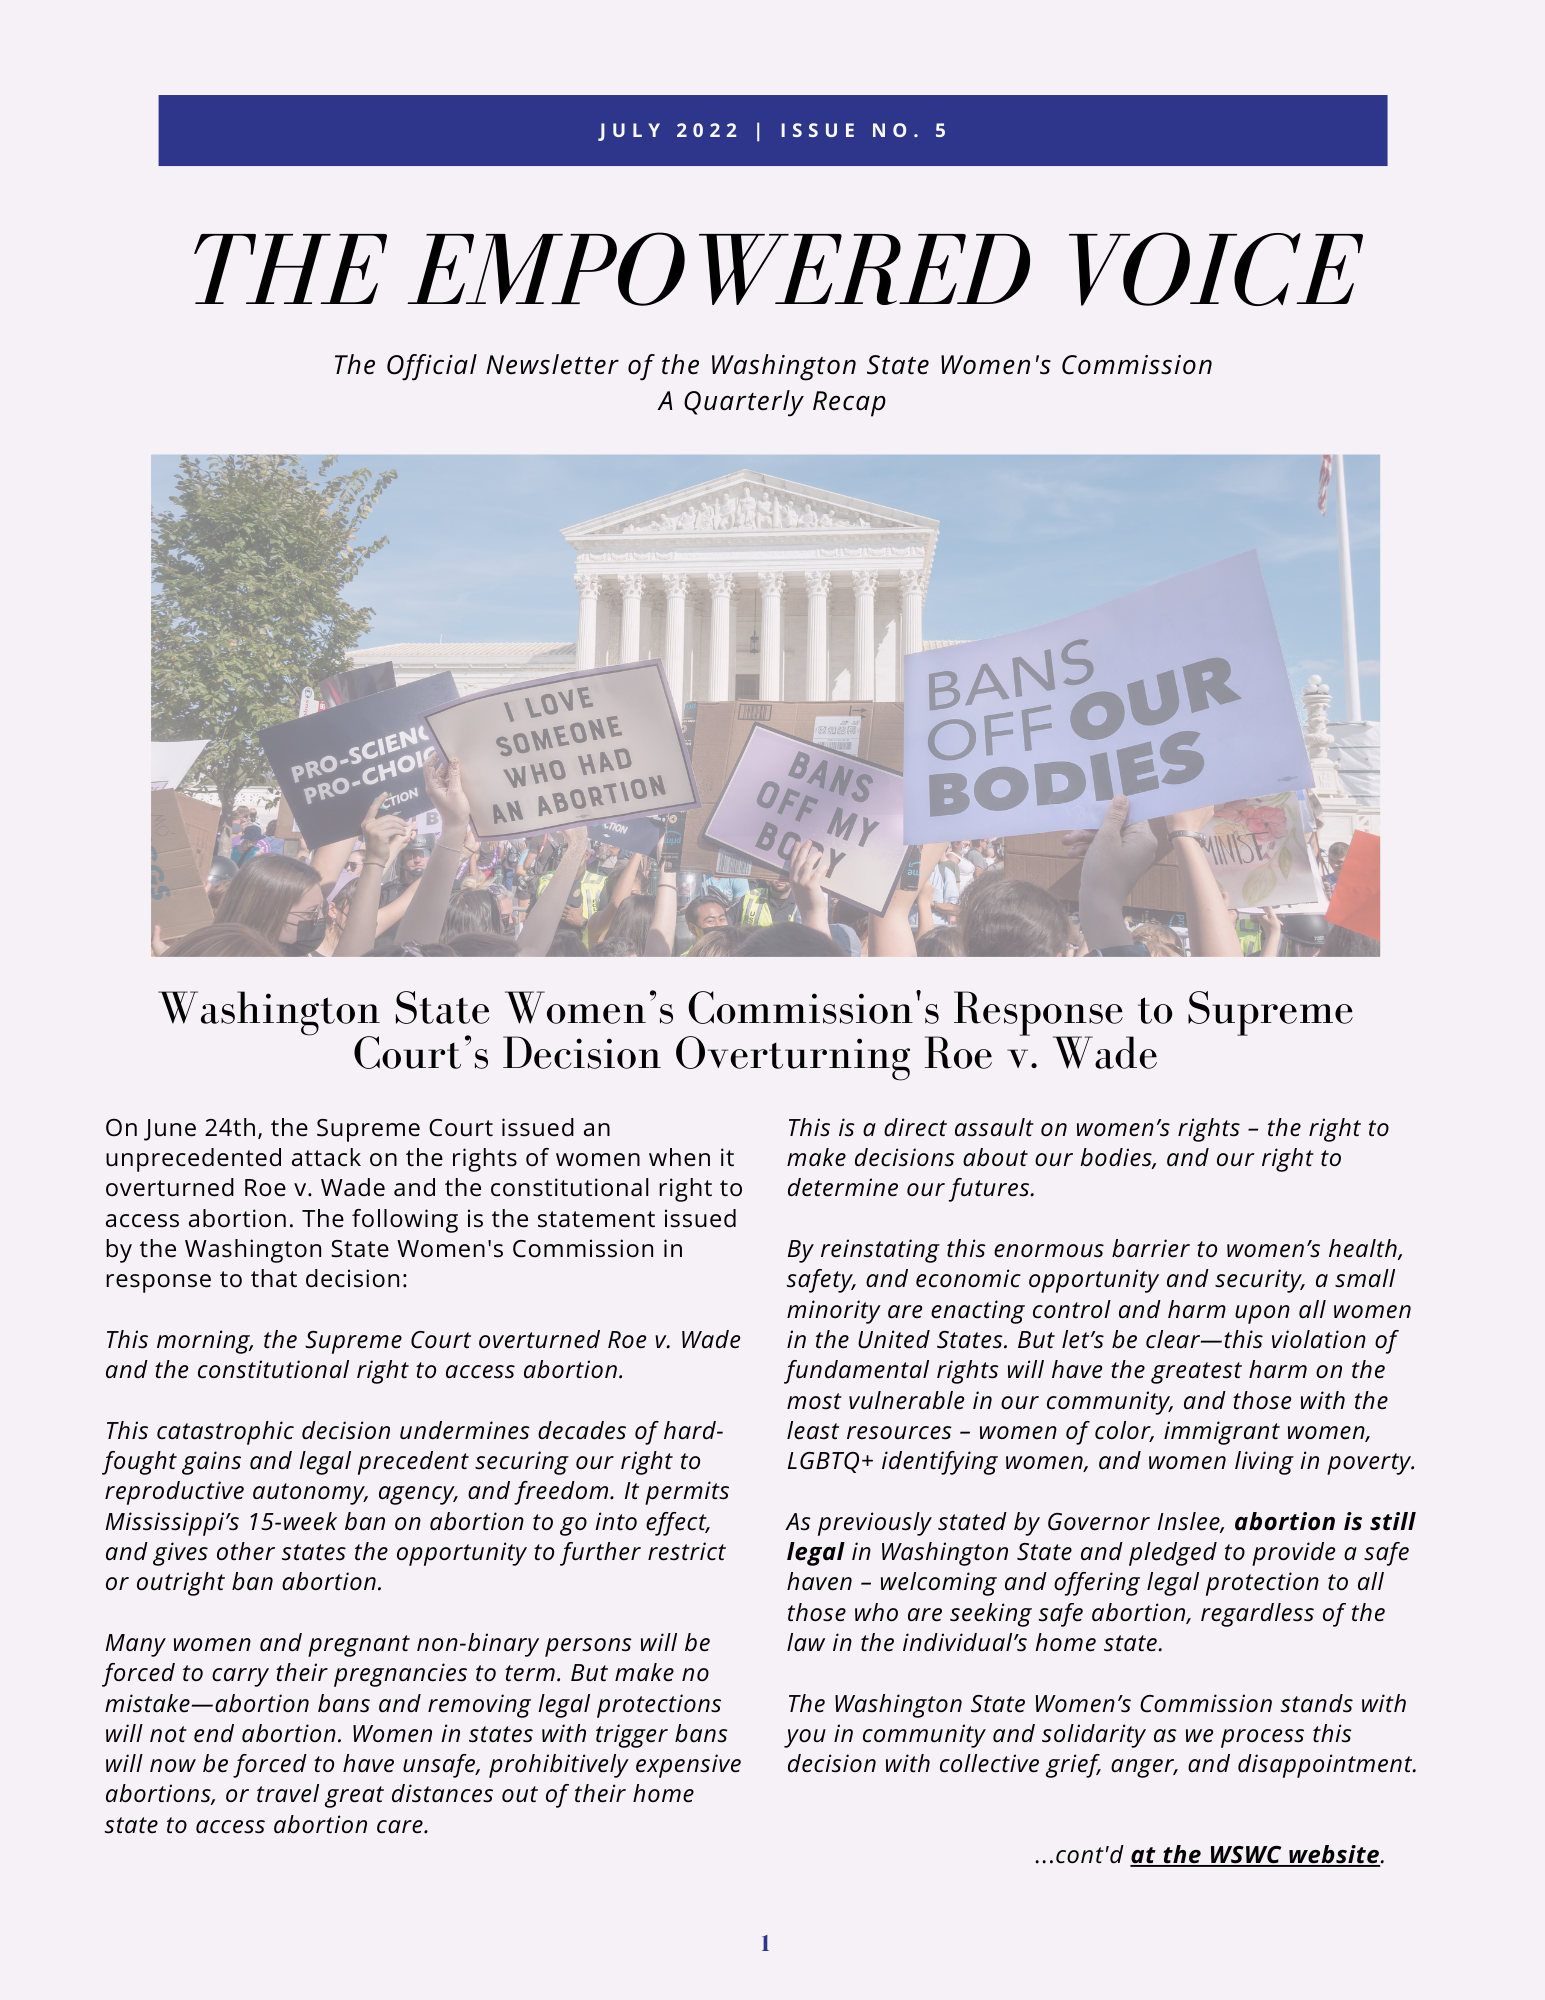 The Empowered Voice: WSWC Quarterly Newsletter